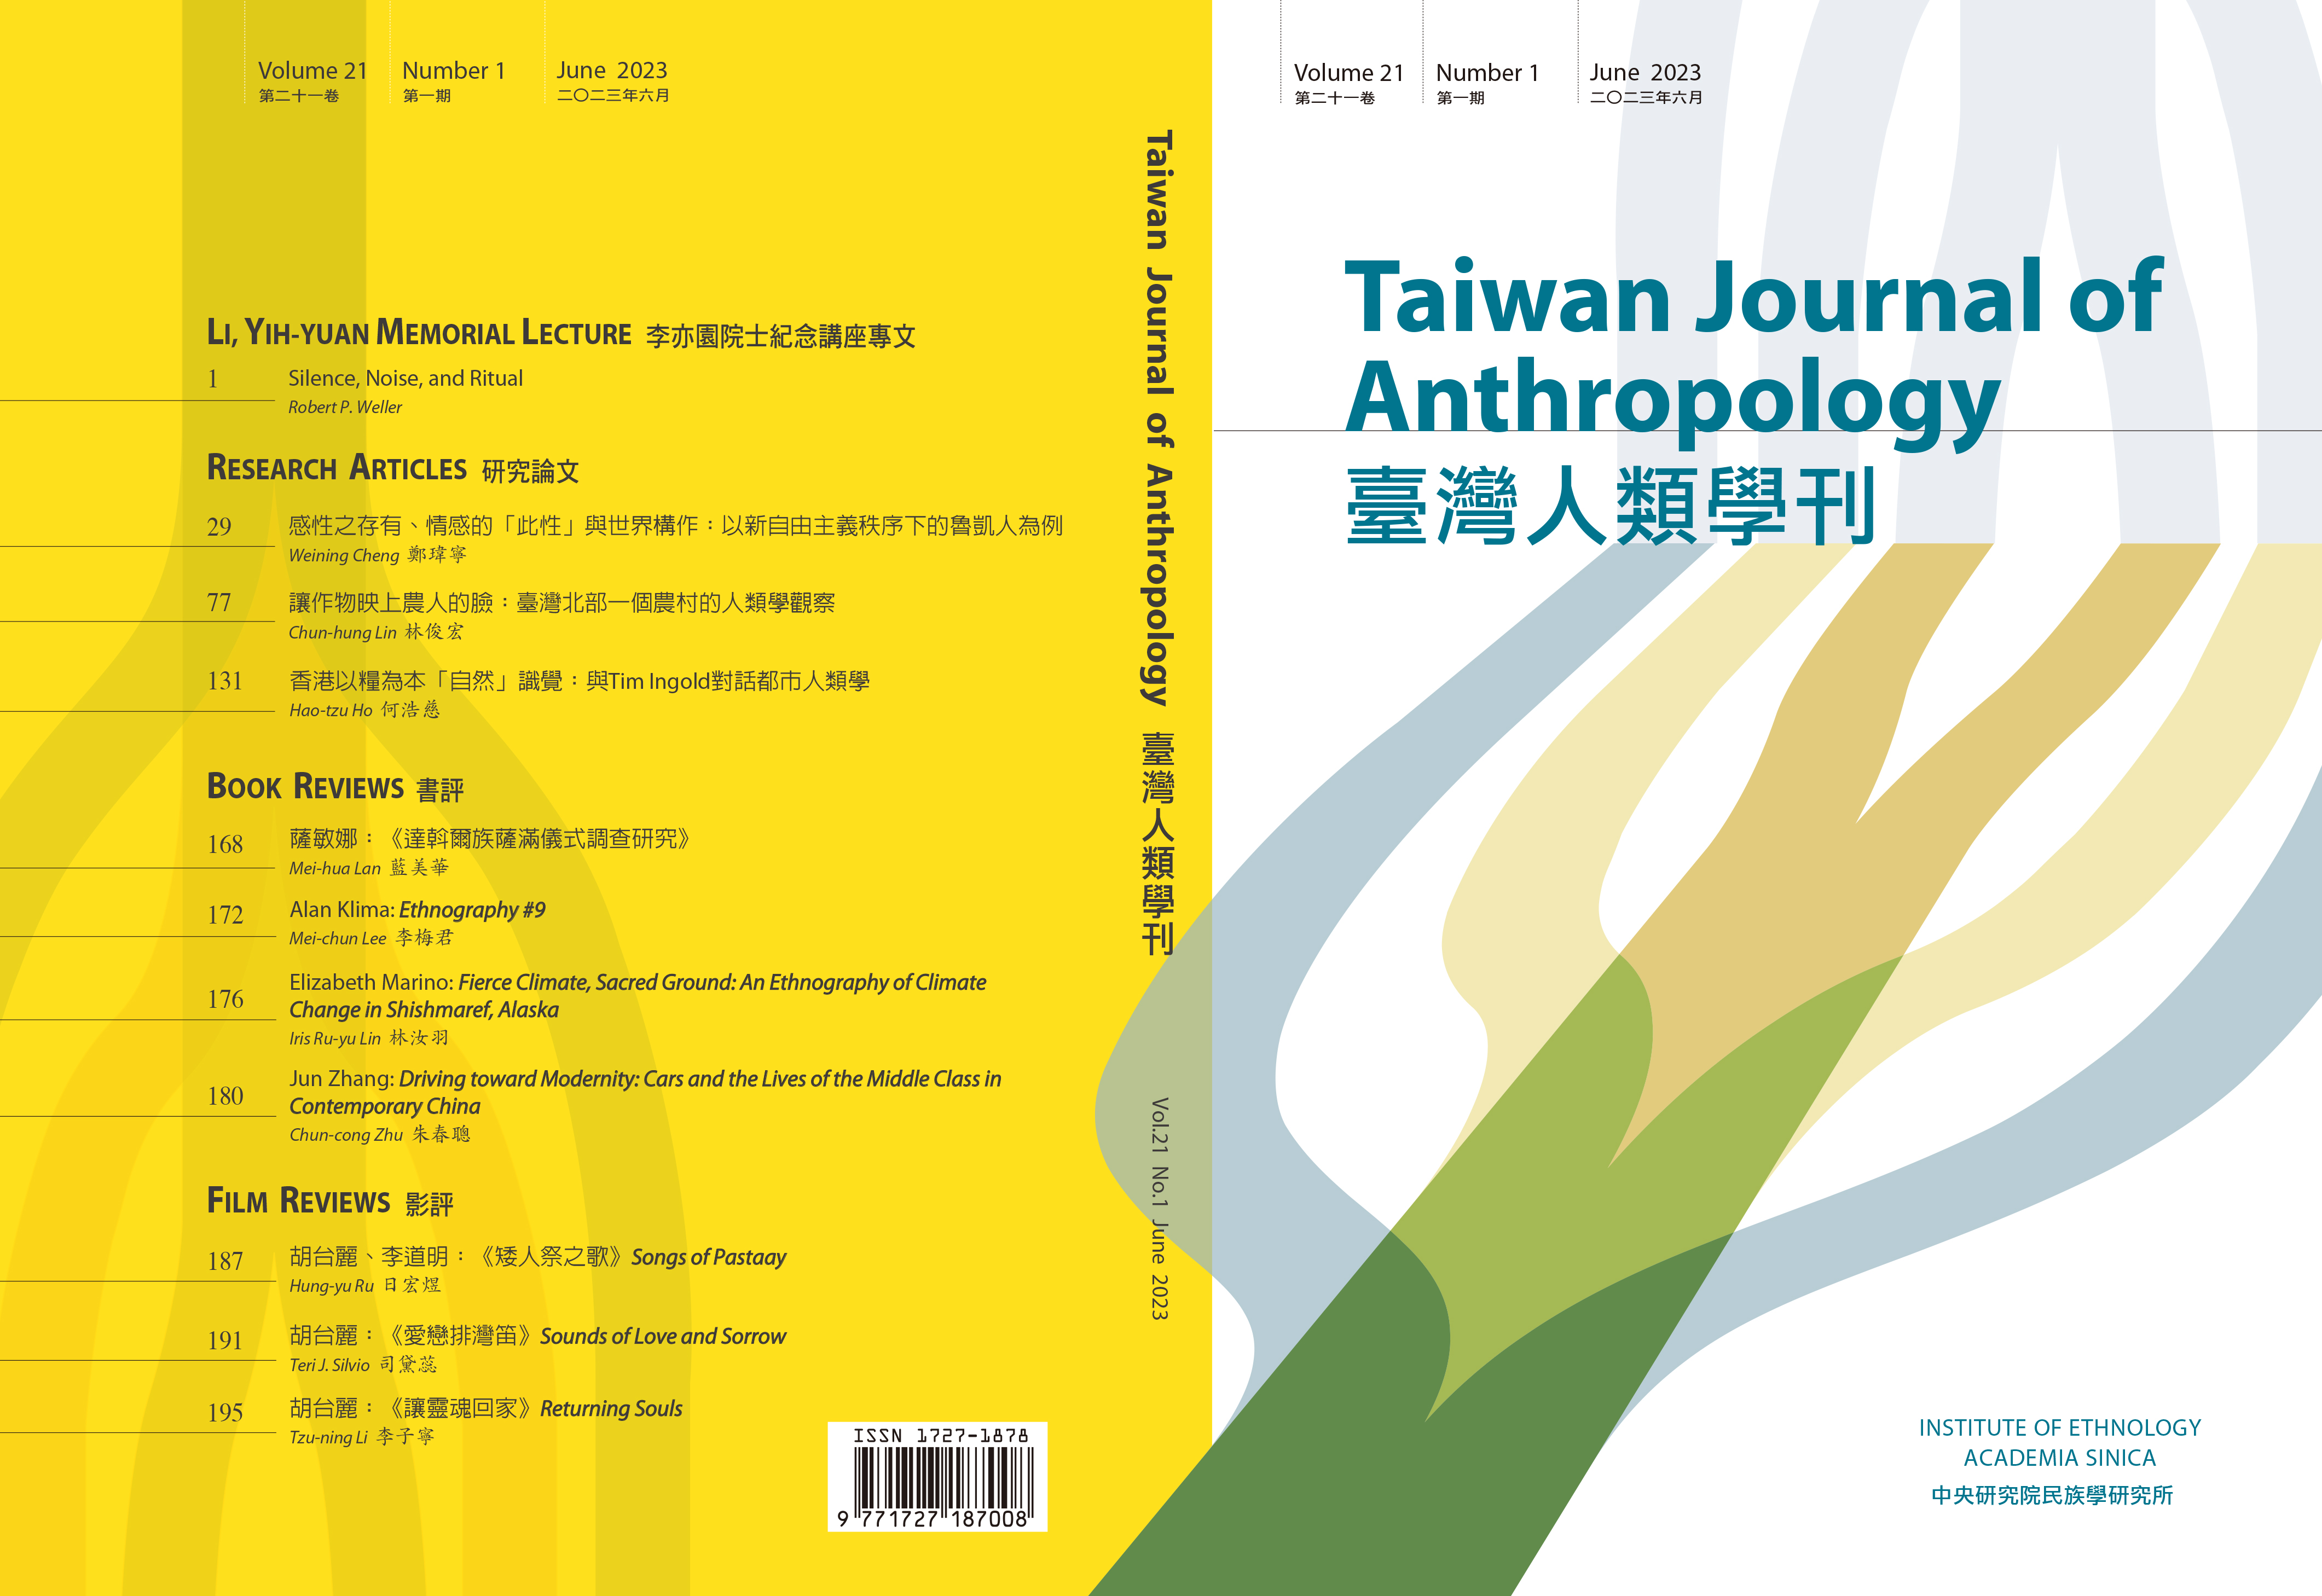 Taiwan Journal of Anthropology, Academia Sinica, Volume 21 No.1 has been published